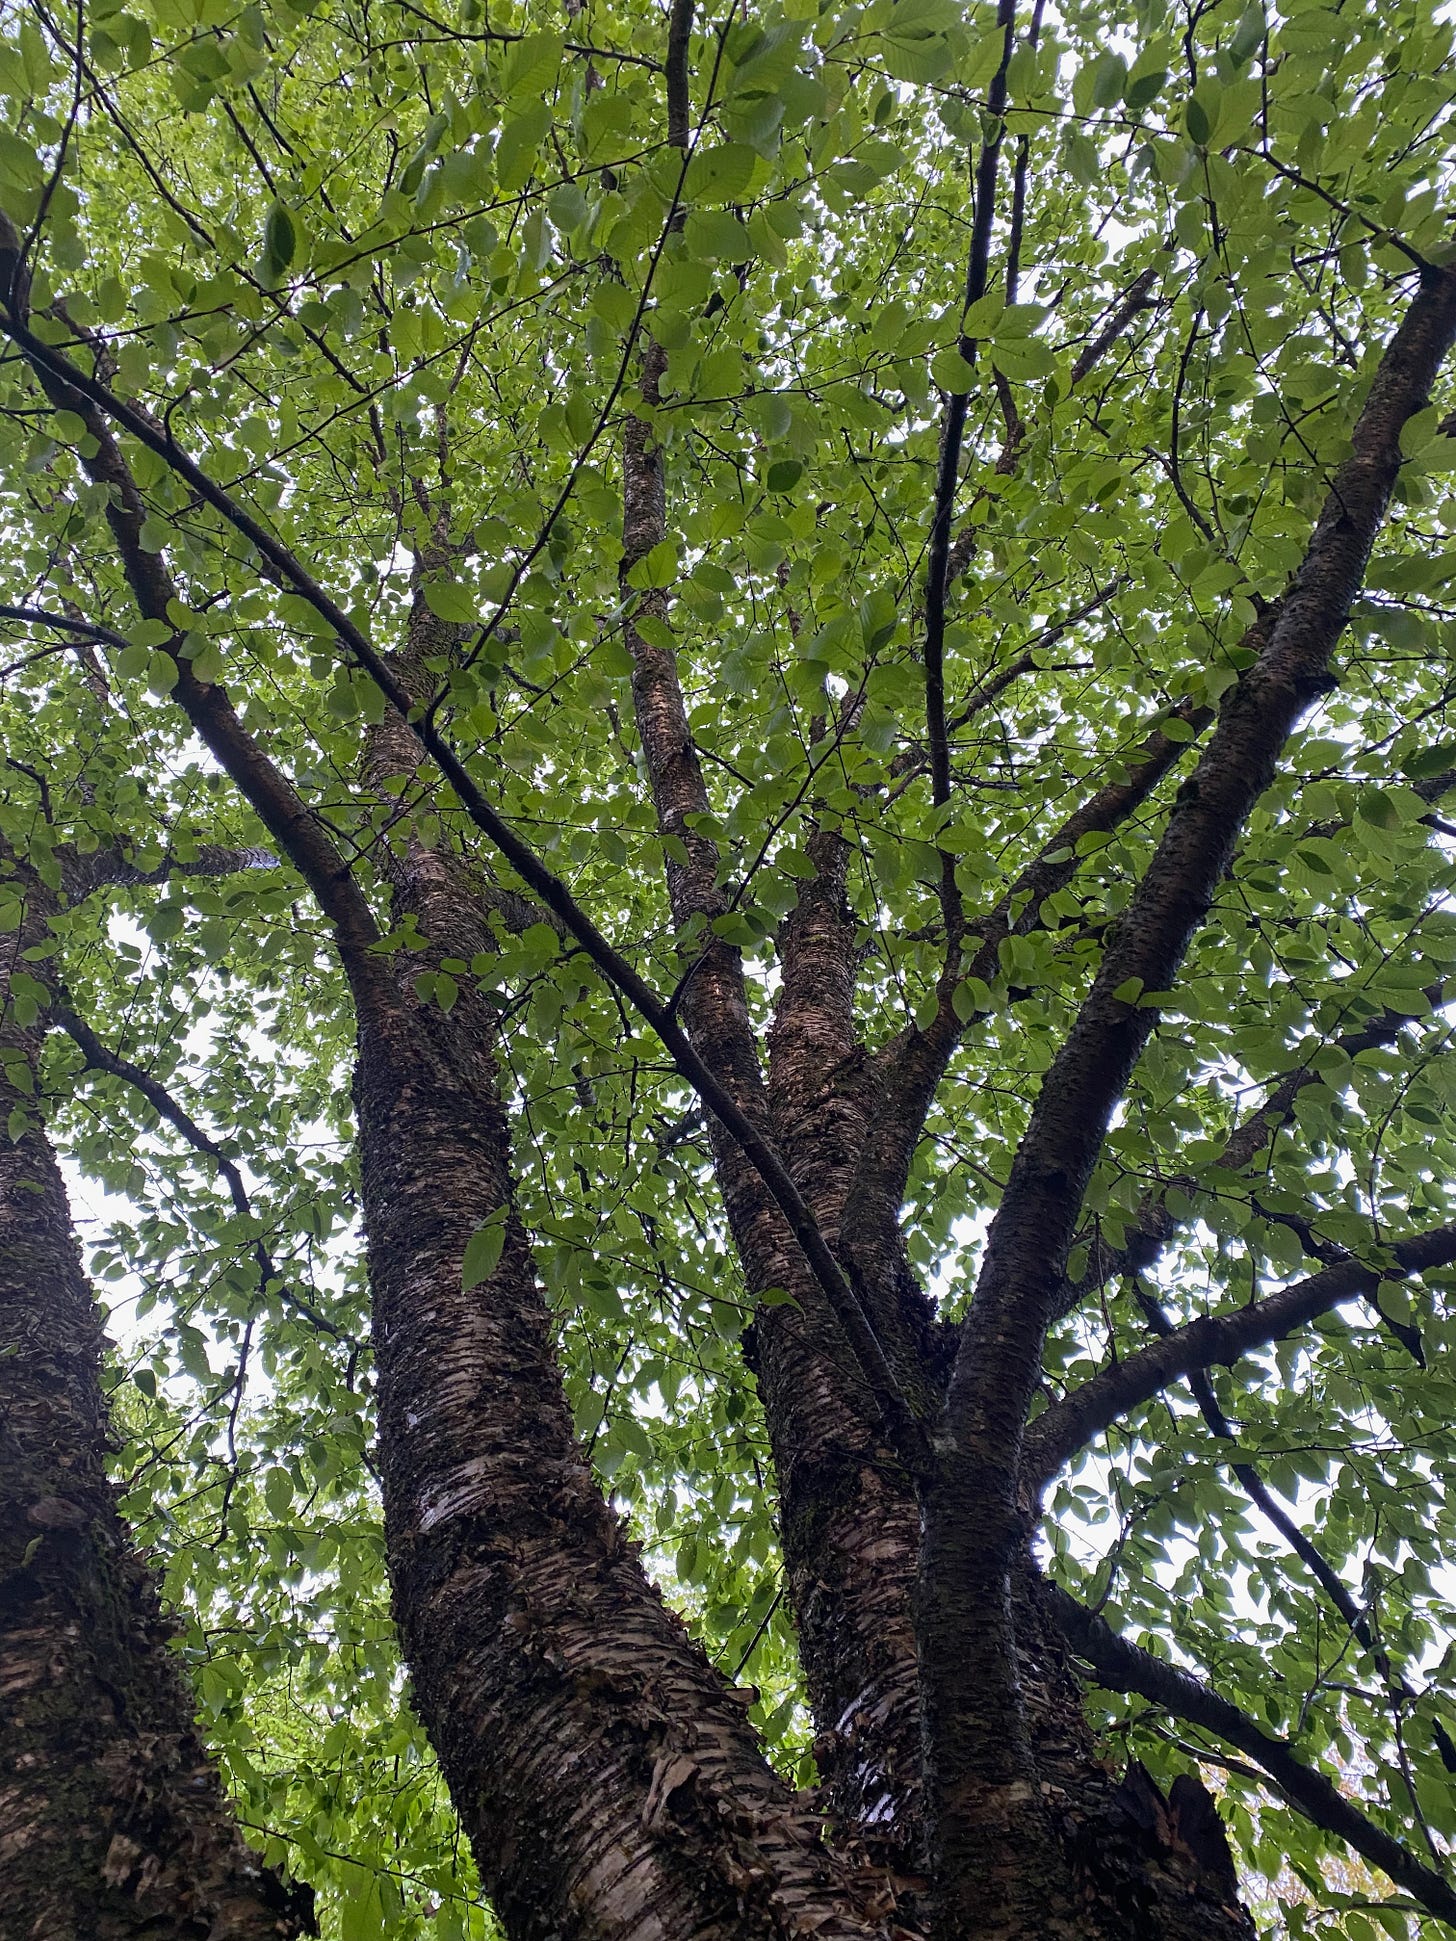 View of a birch tree stretching up into the sky. A thick dark grey trunk splits into several branches and a canopy of green leaves takes up most of the photo.